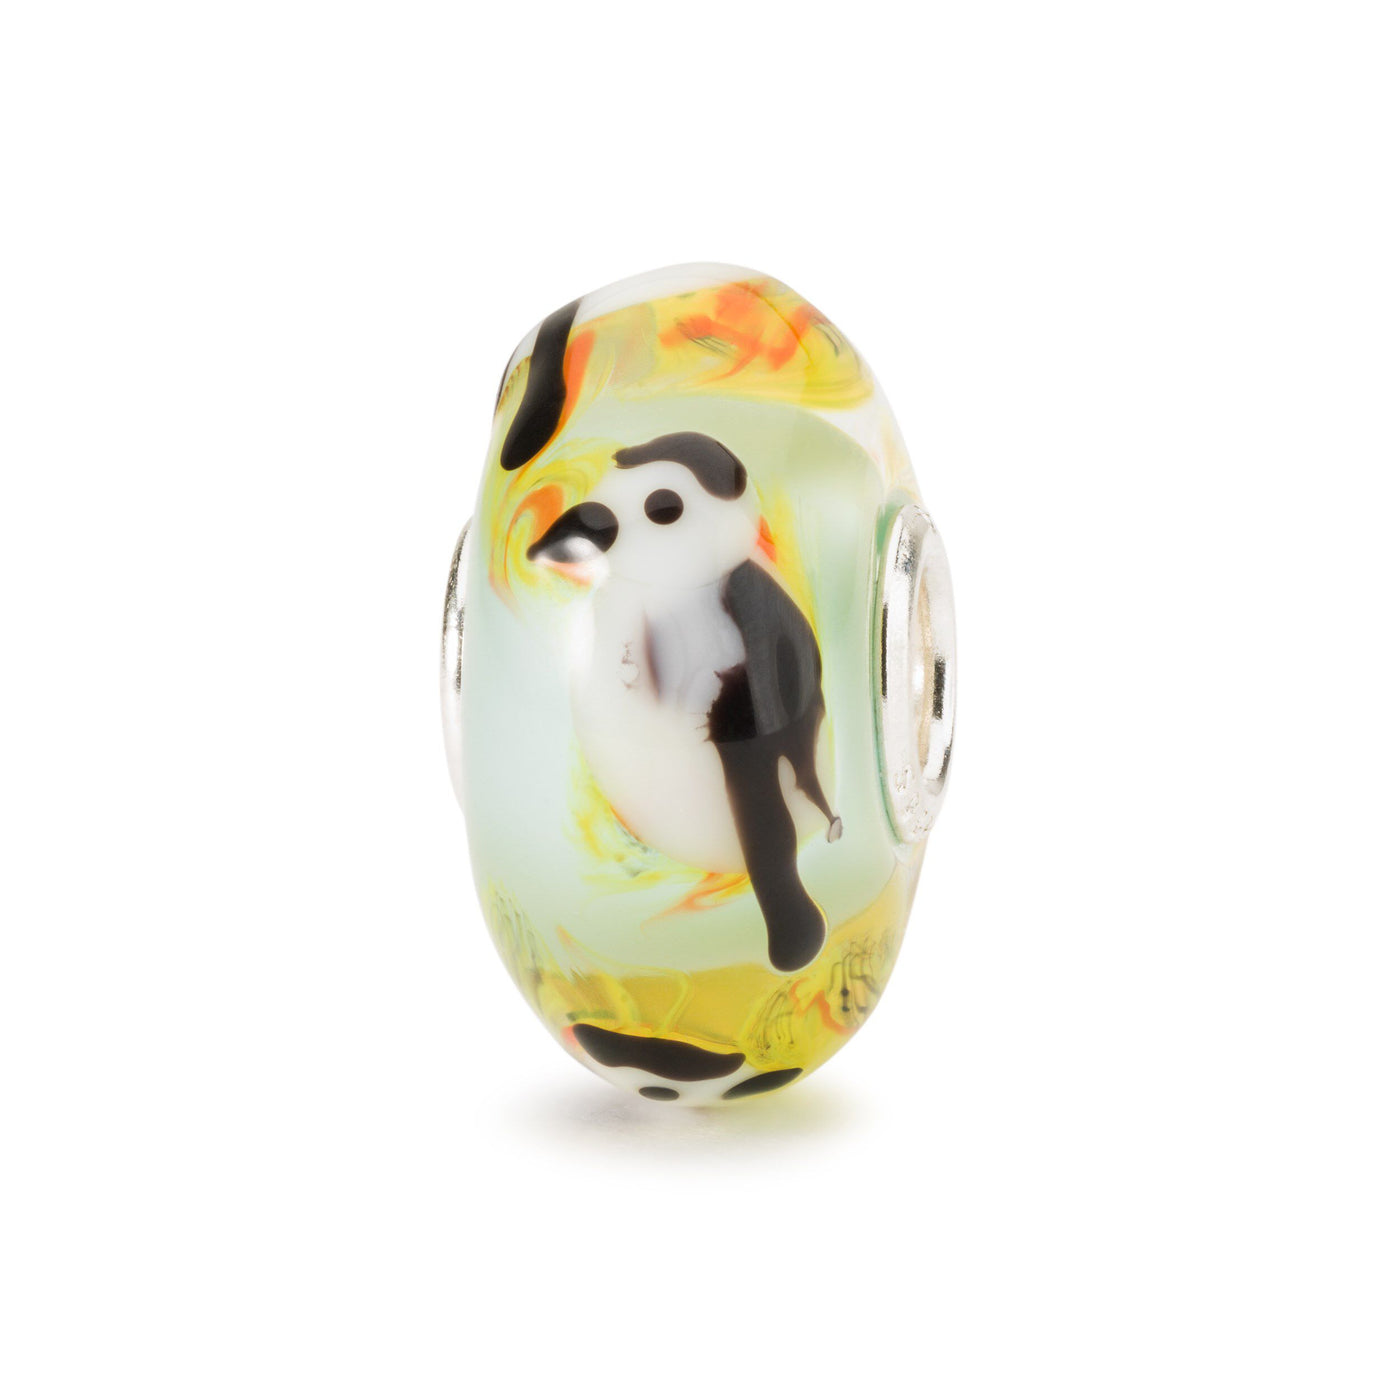 Song of Hope - Trollbeads Canada